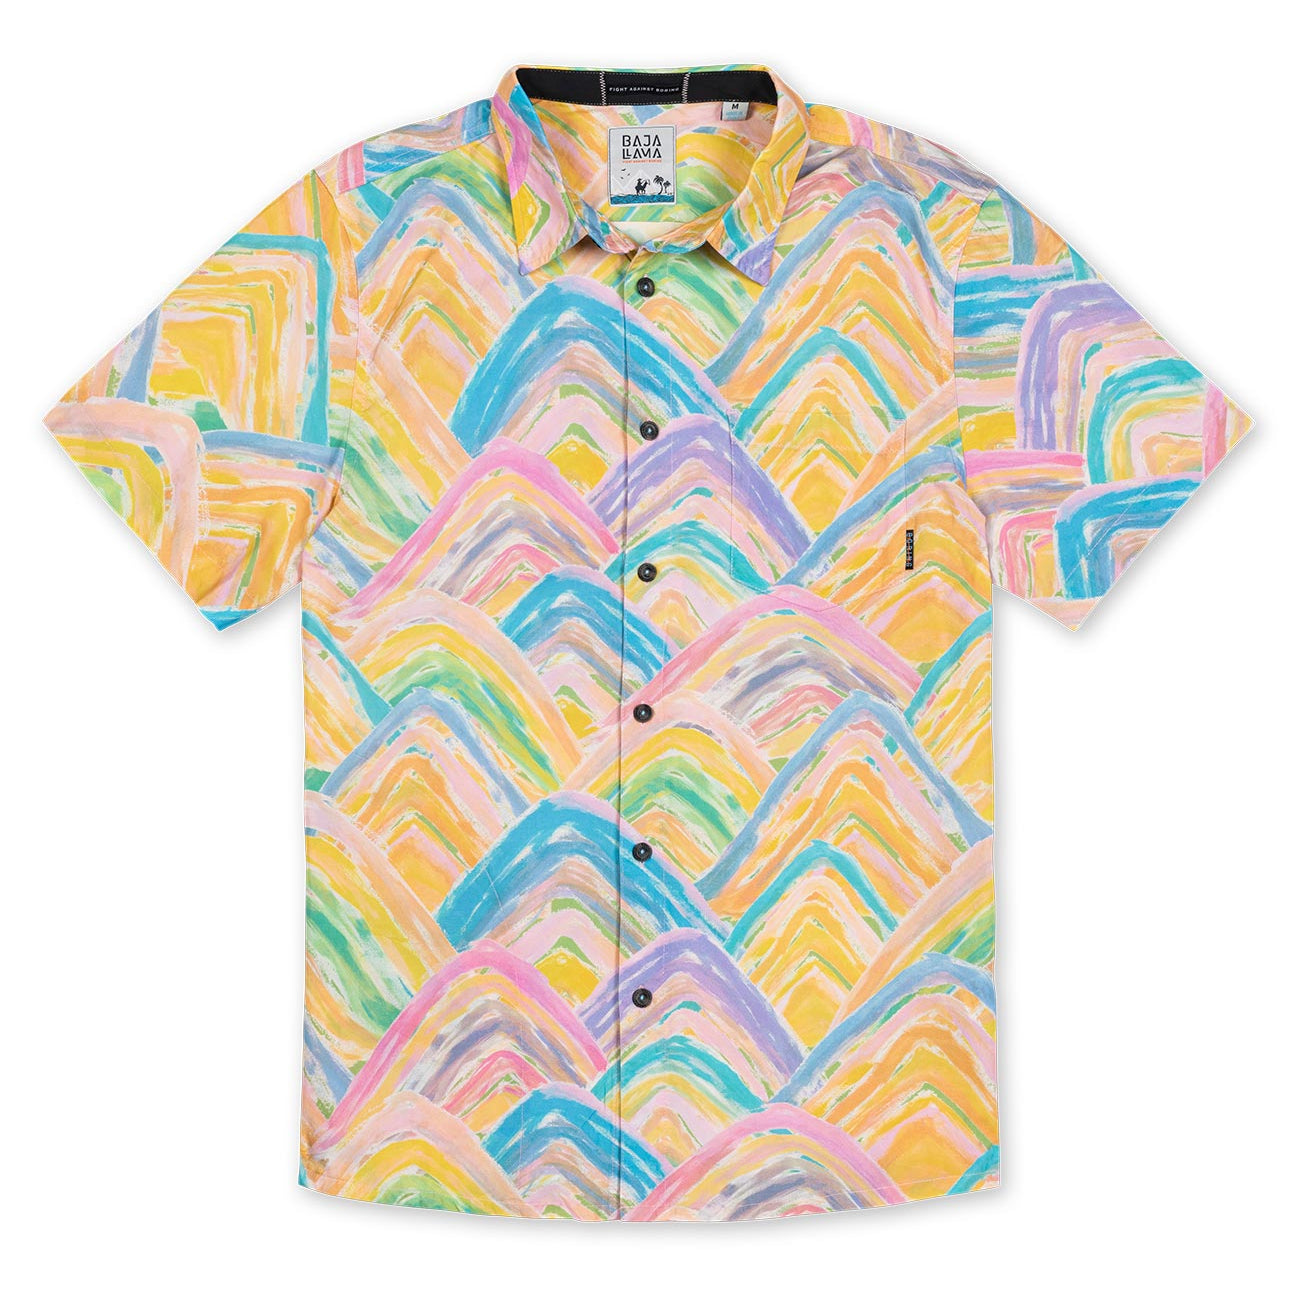 Button up shirt with digitally printed rainbow mountain inspired watercolor design